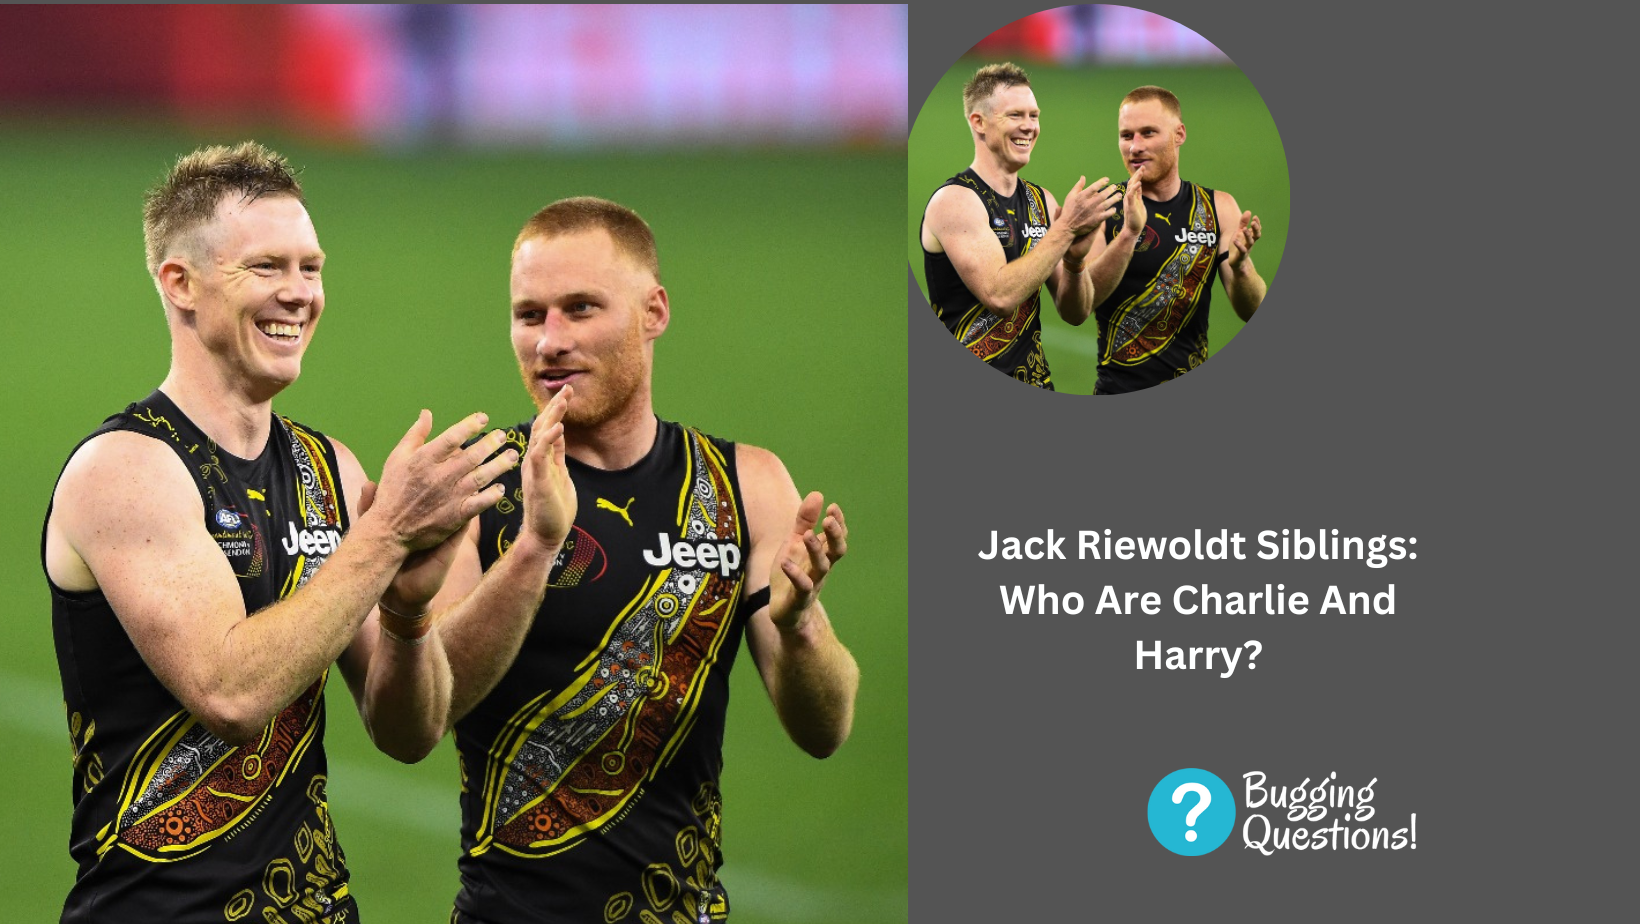 Jack Riewoldt Siblings: Who Are Charlie And Harry?